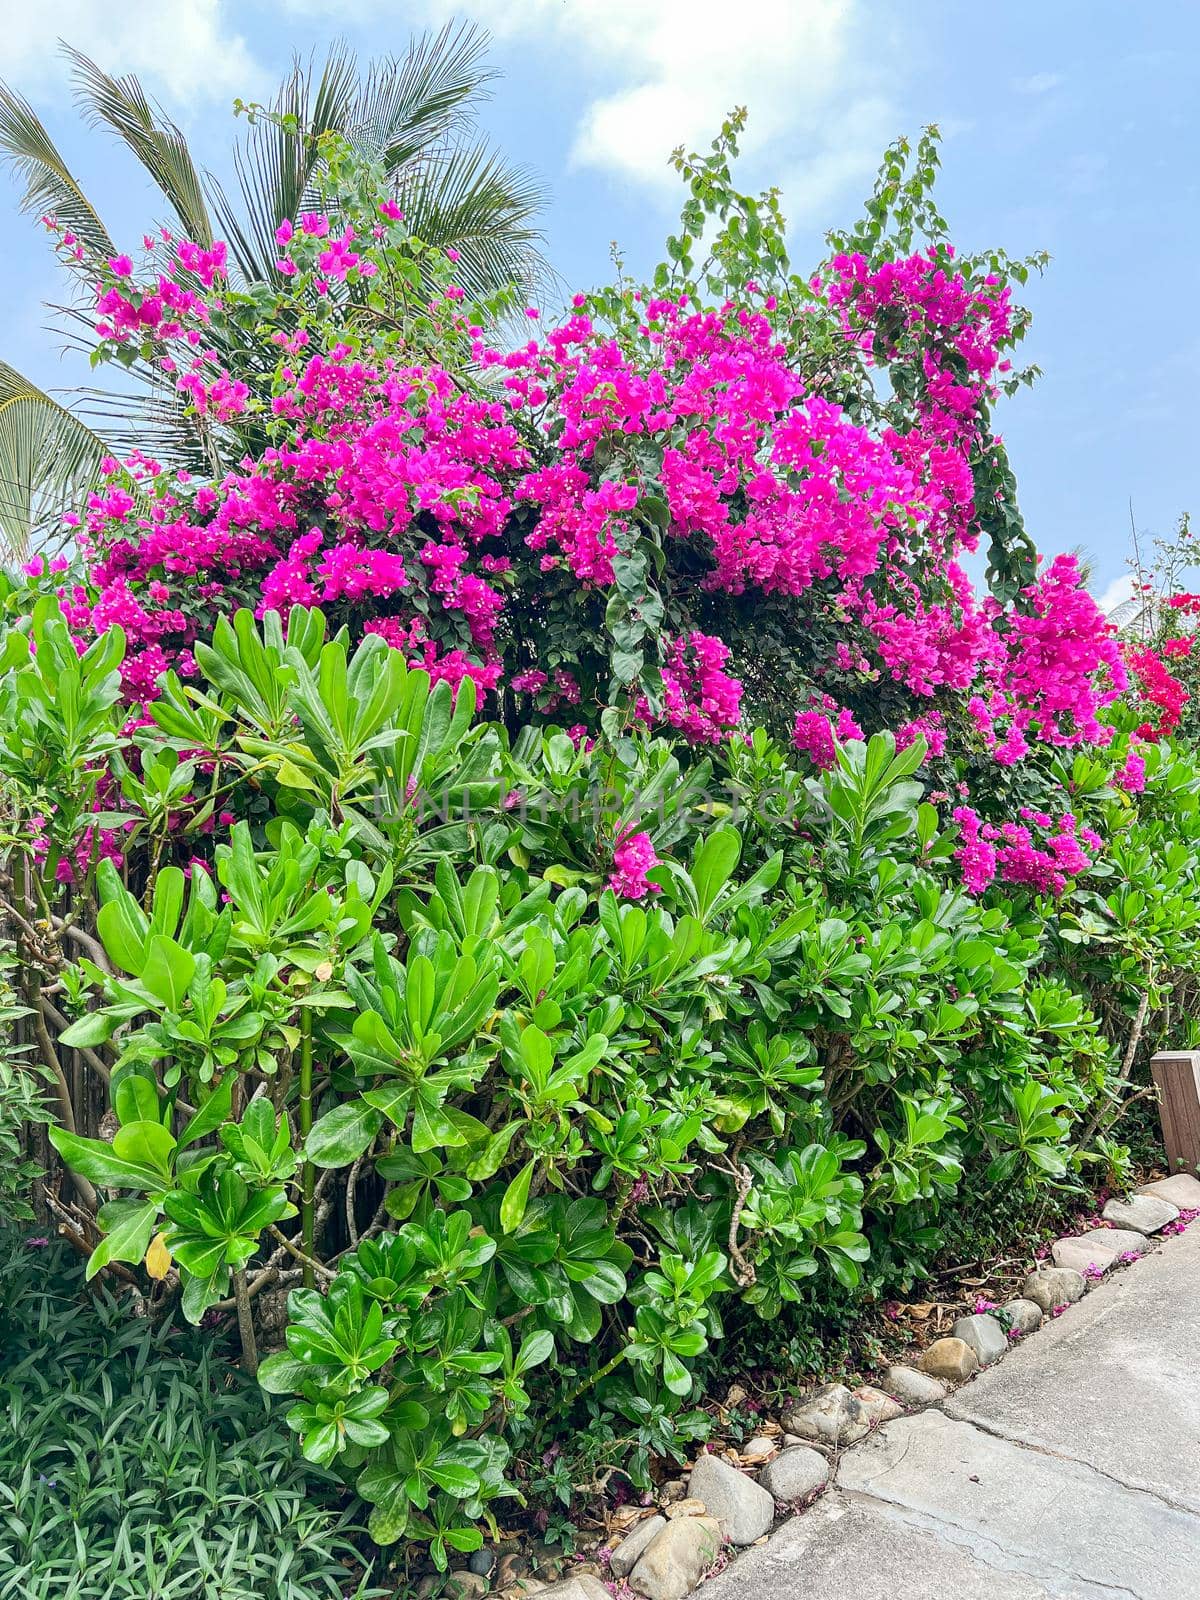 Bougainvillea flowers are decorated in the garden part.